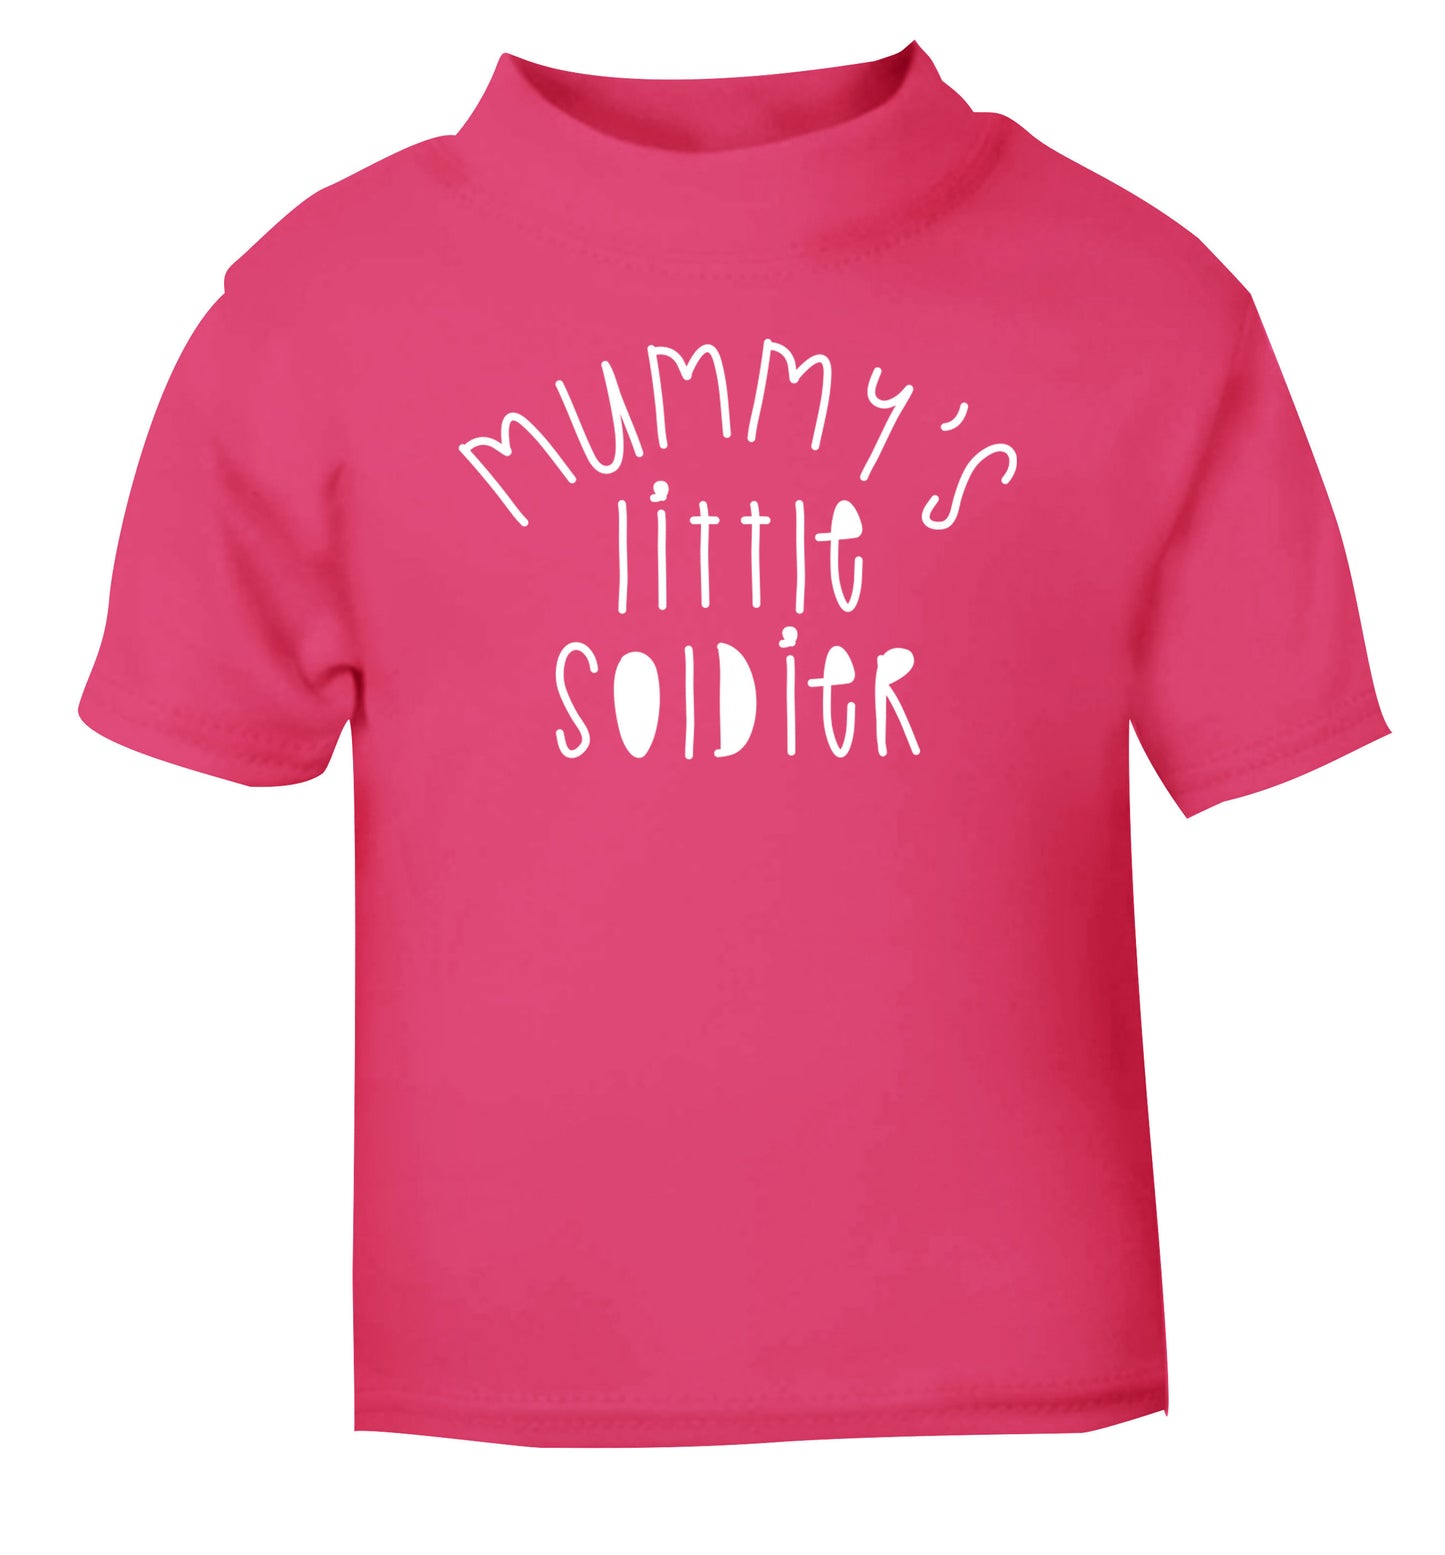 Mummy's little soldier pink Baby Toddler Tshirt 2 Years